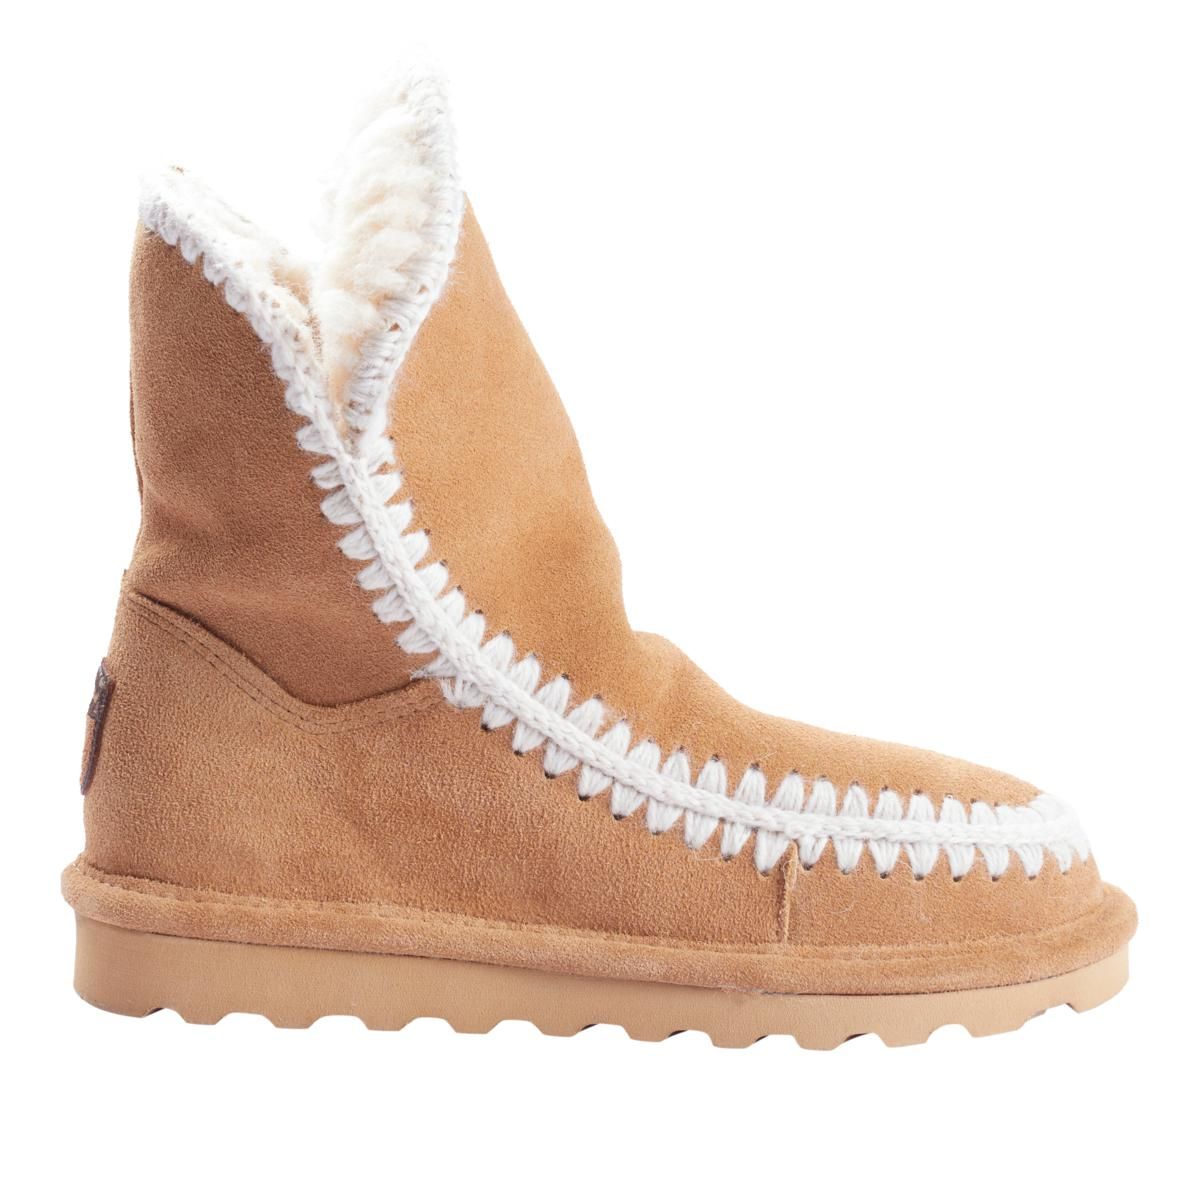 BEARPAW Star Suede Water- and Stain-Repellent Boot | HSN